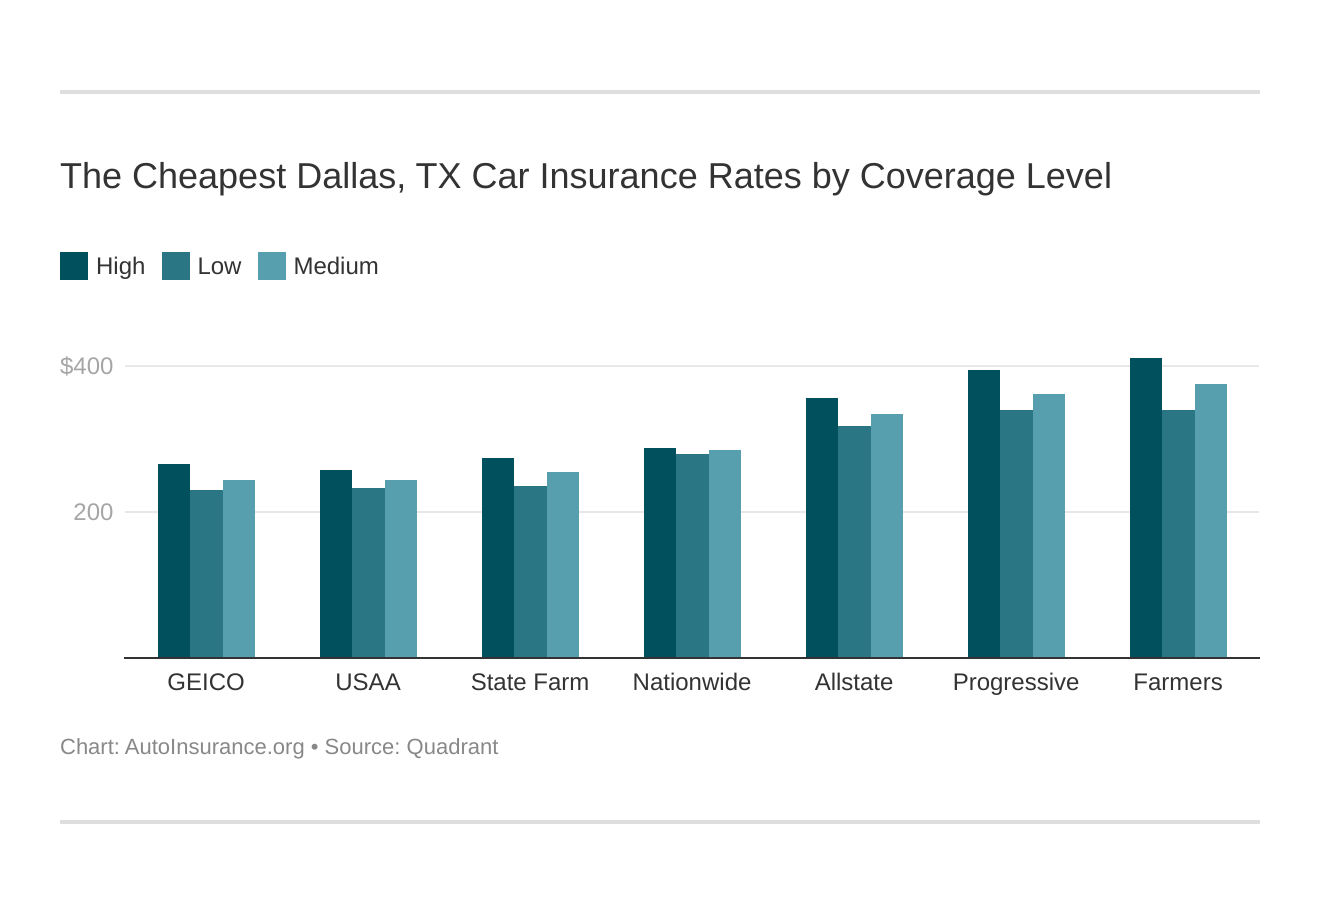 The Cheapest Dallas, TX Car Insurance Rates by Coverage Level